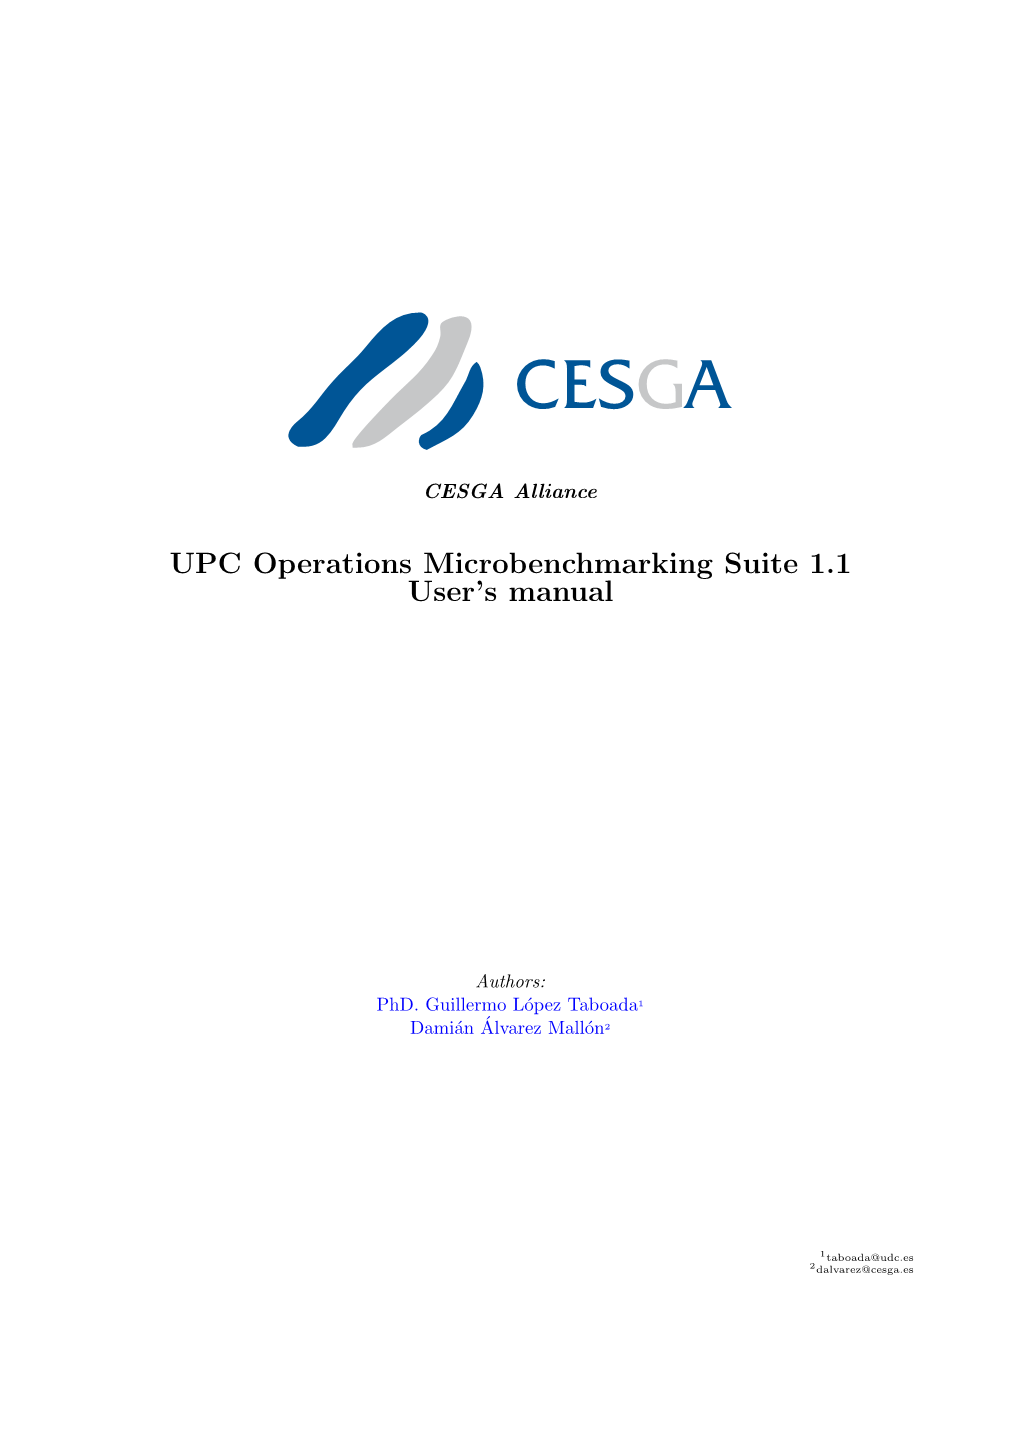 UPC Operations Microbenchmarking Suite 1.1 User's Manual